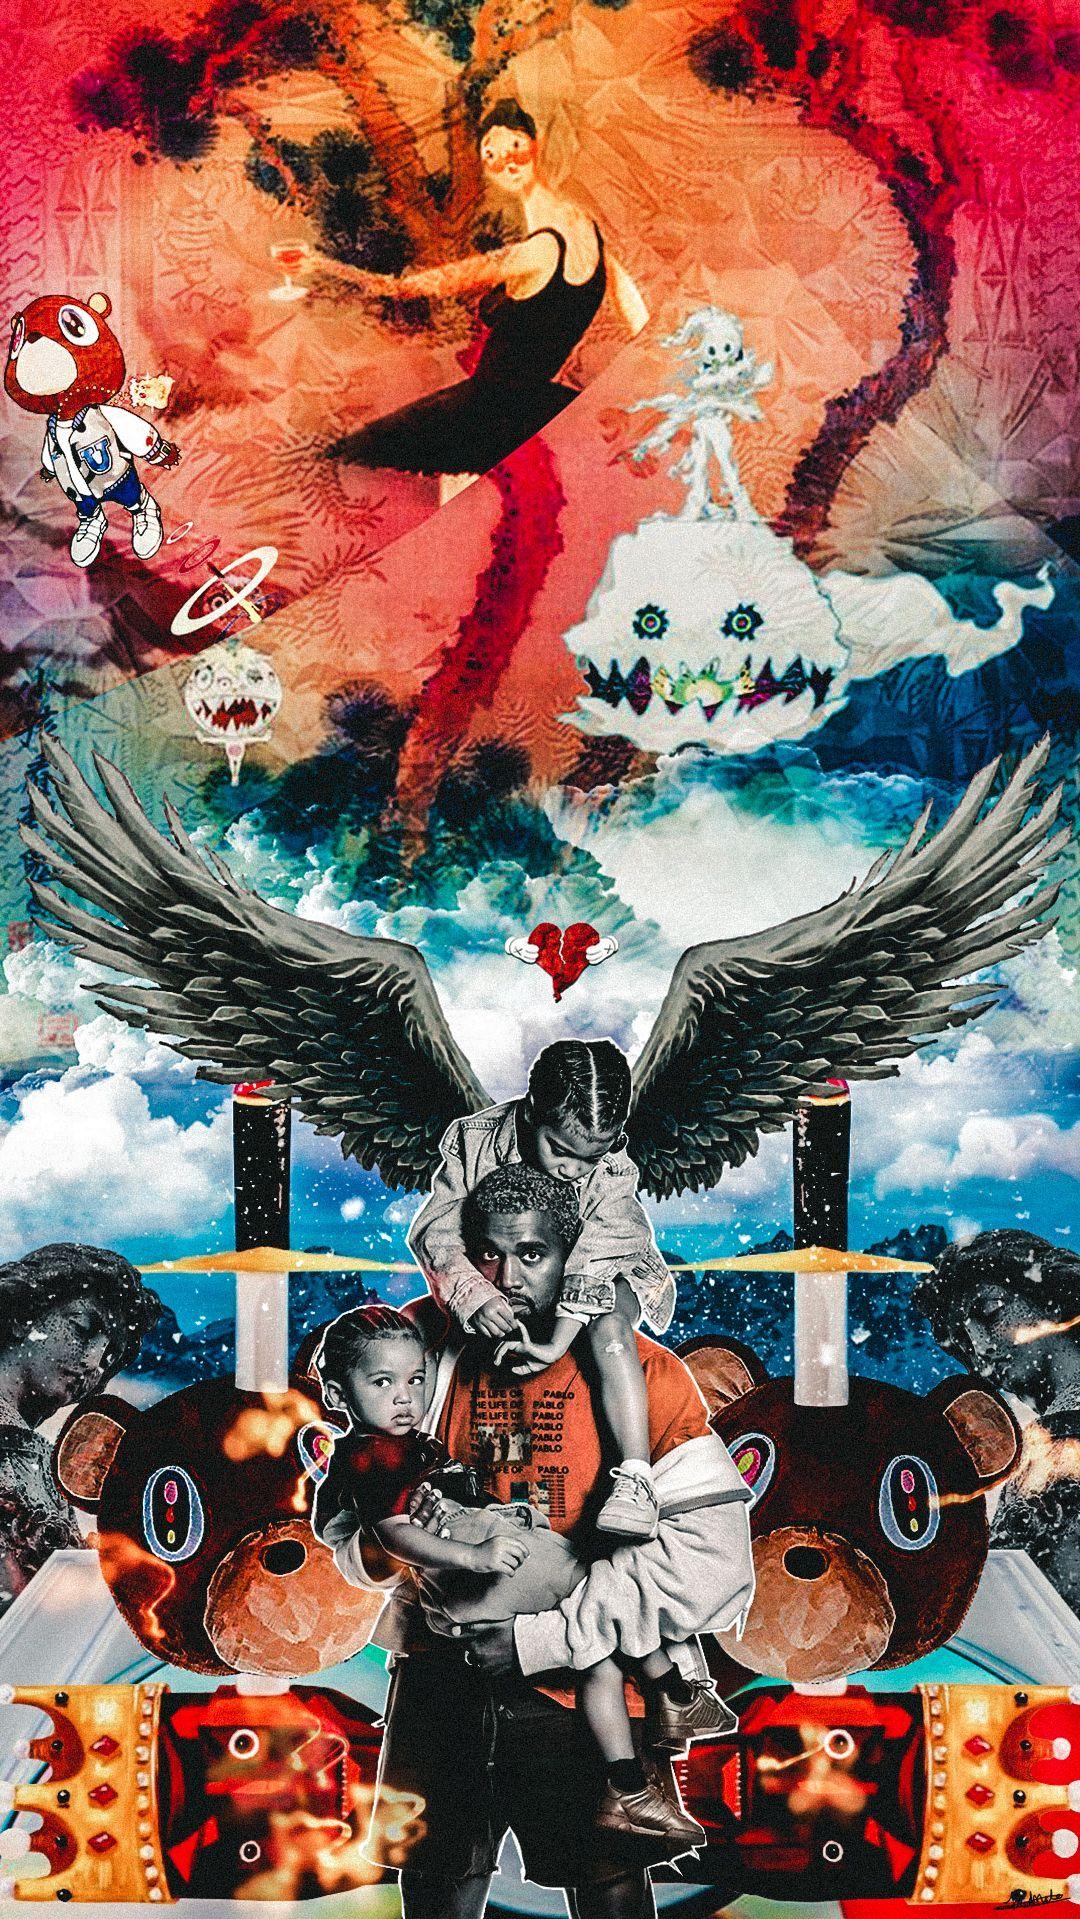 What discography can top Ye rKanye